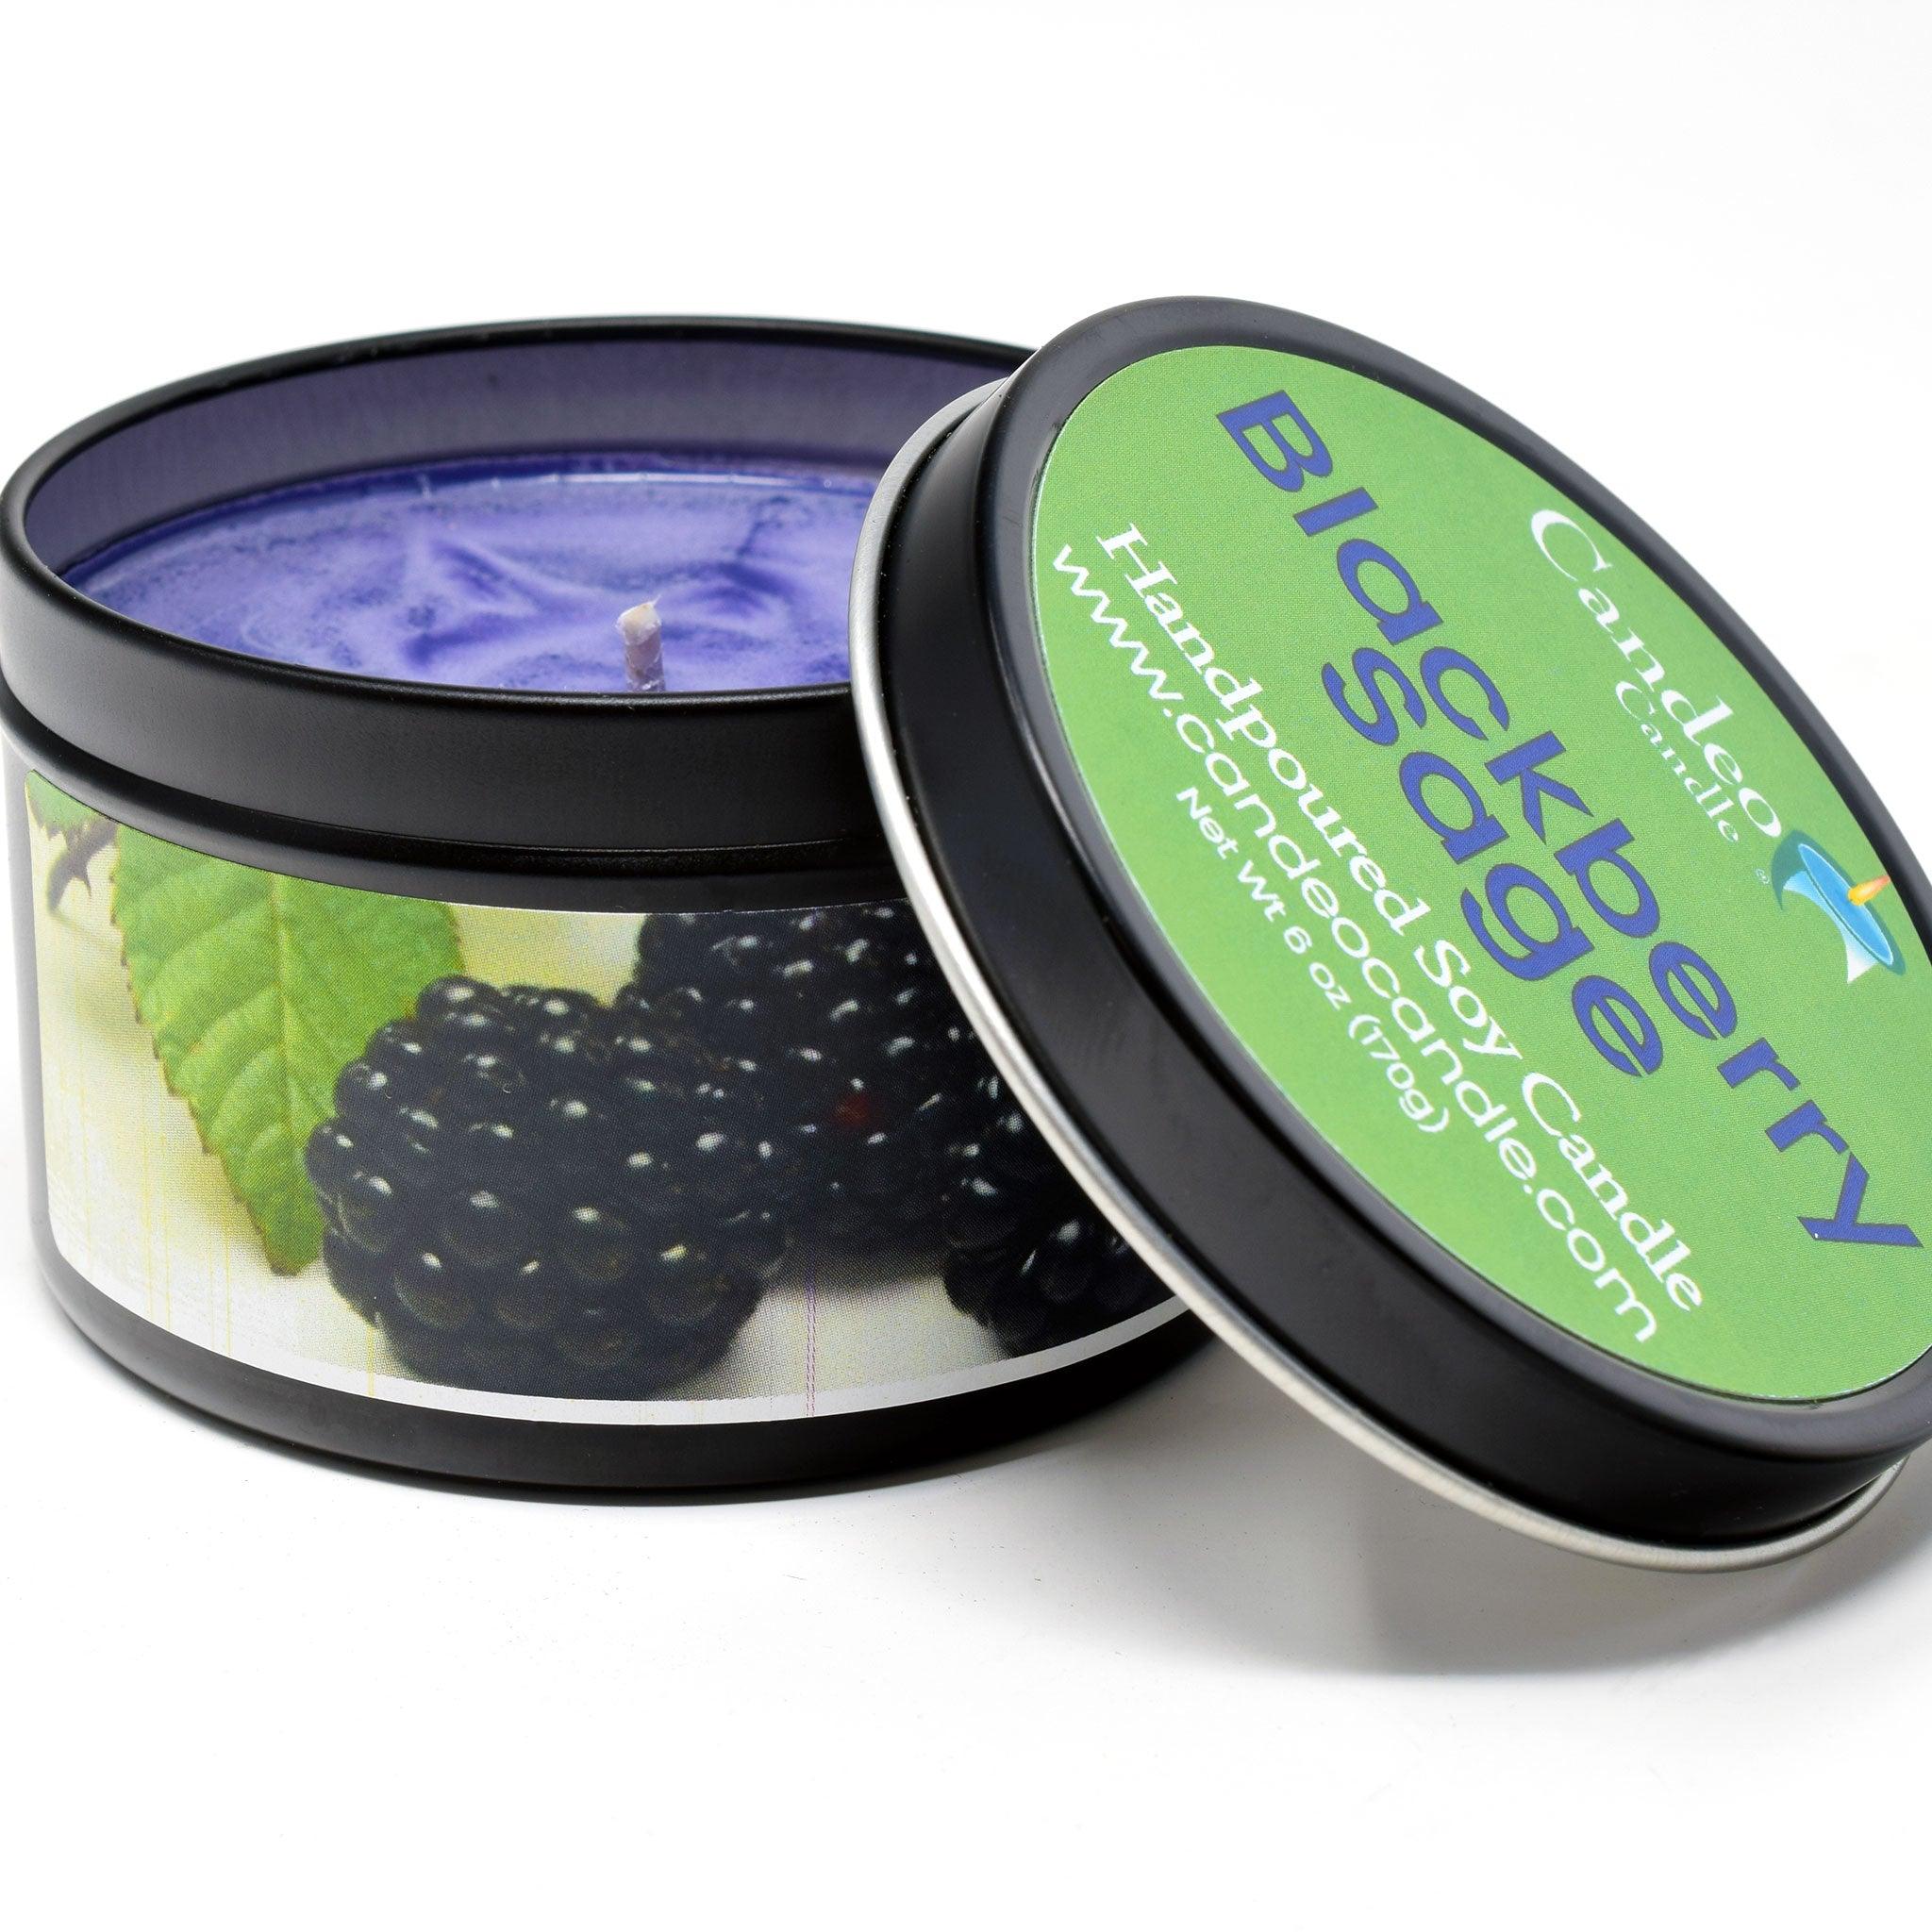 Blackberry Sage, 6oz Soy Candle Tin - Candeo Candle